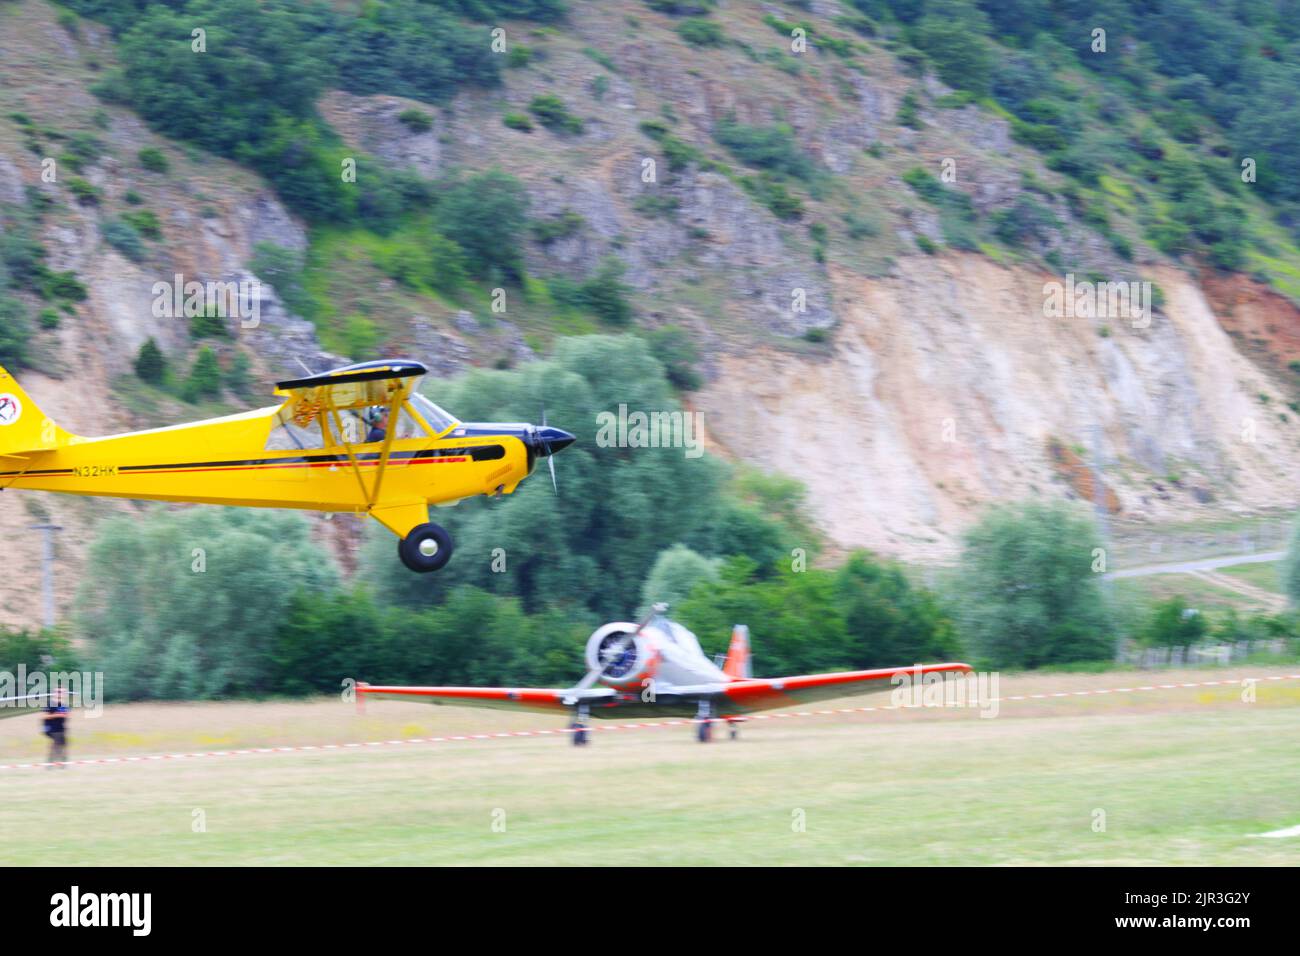 Single engine yellow air plane flying at low altitude close to the ground Stock Photo